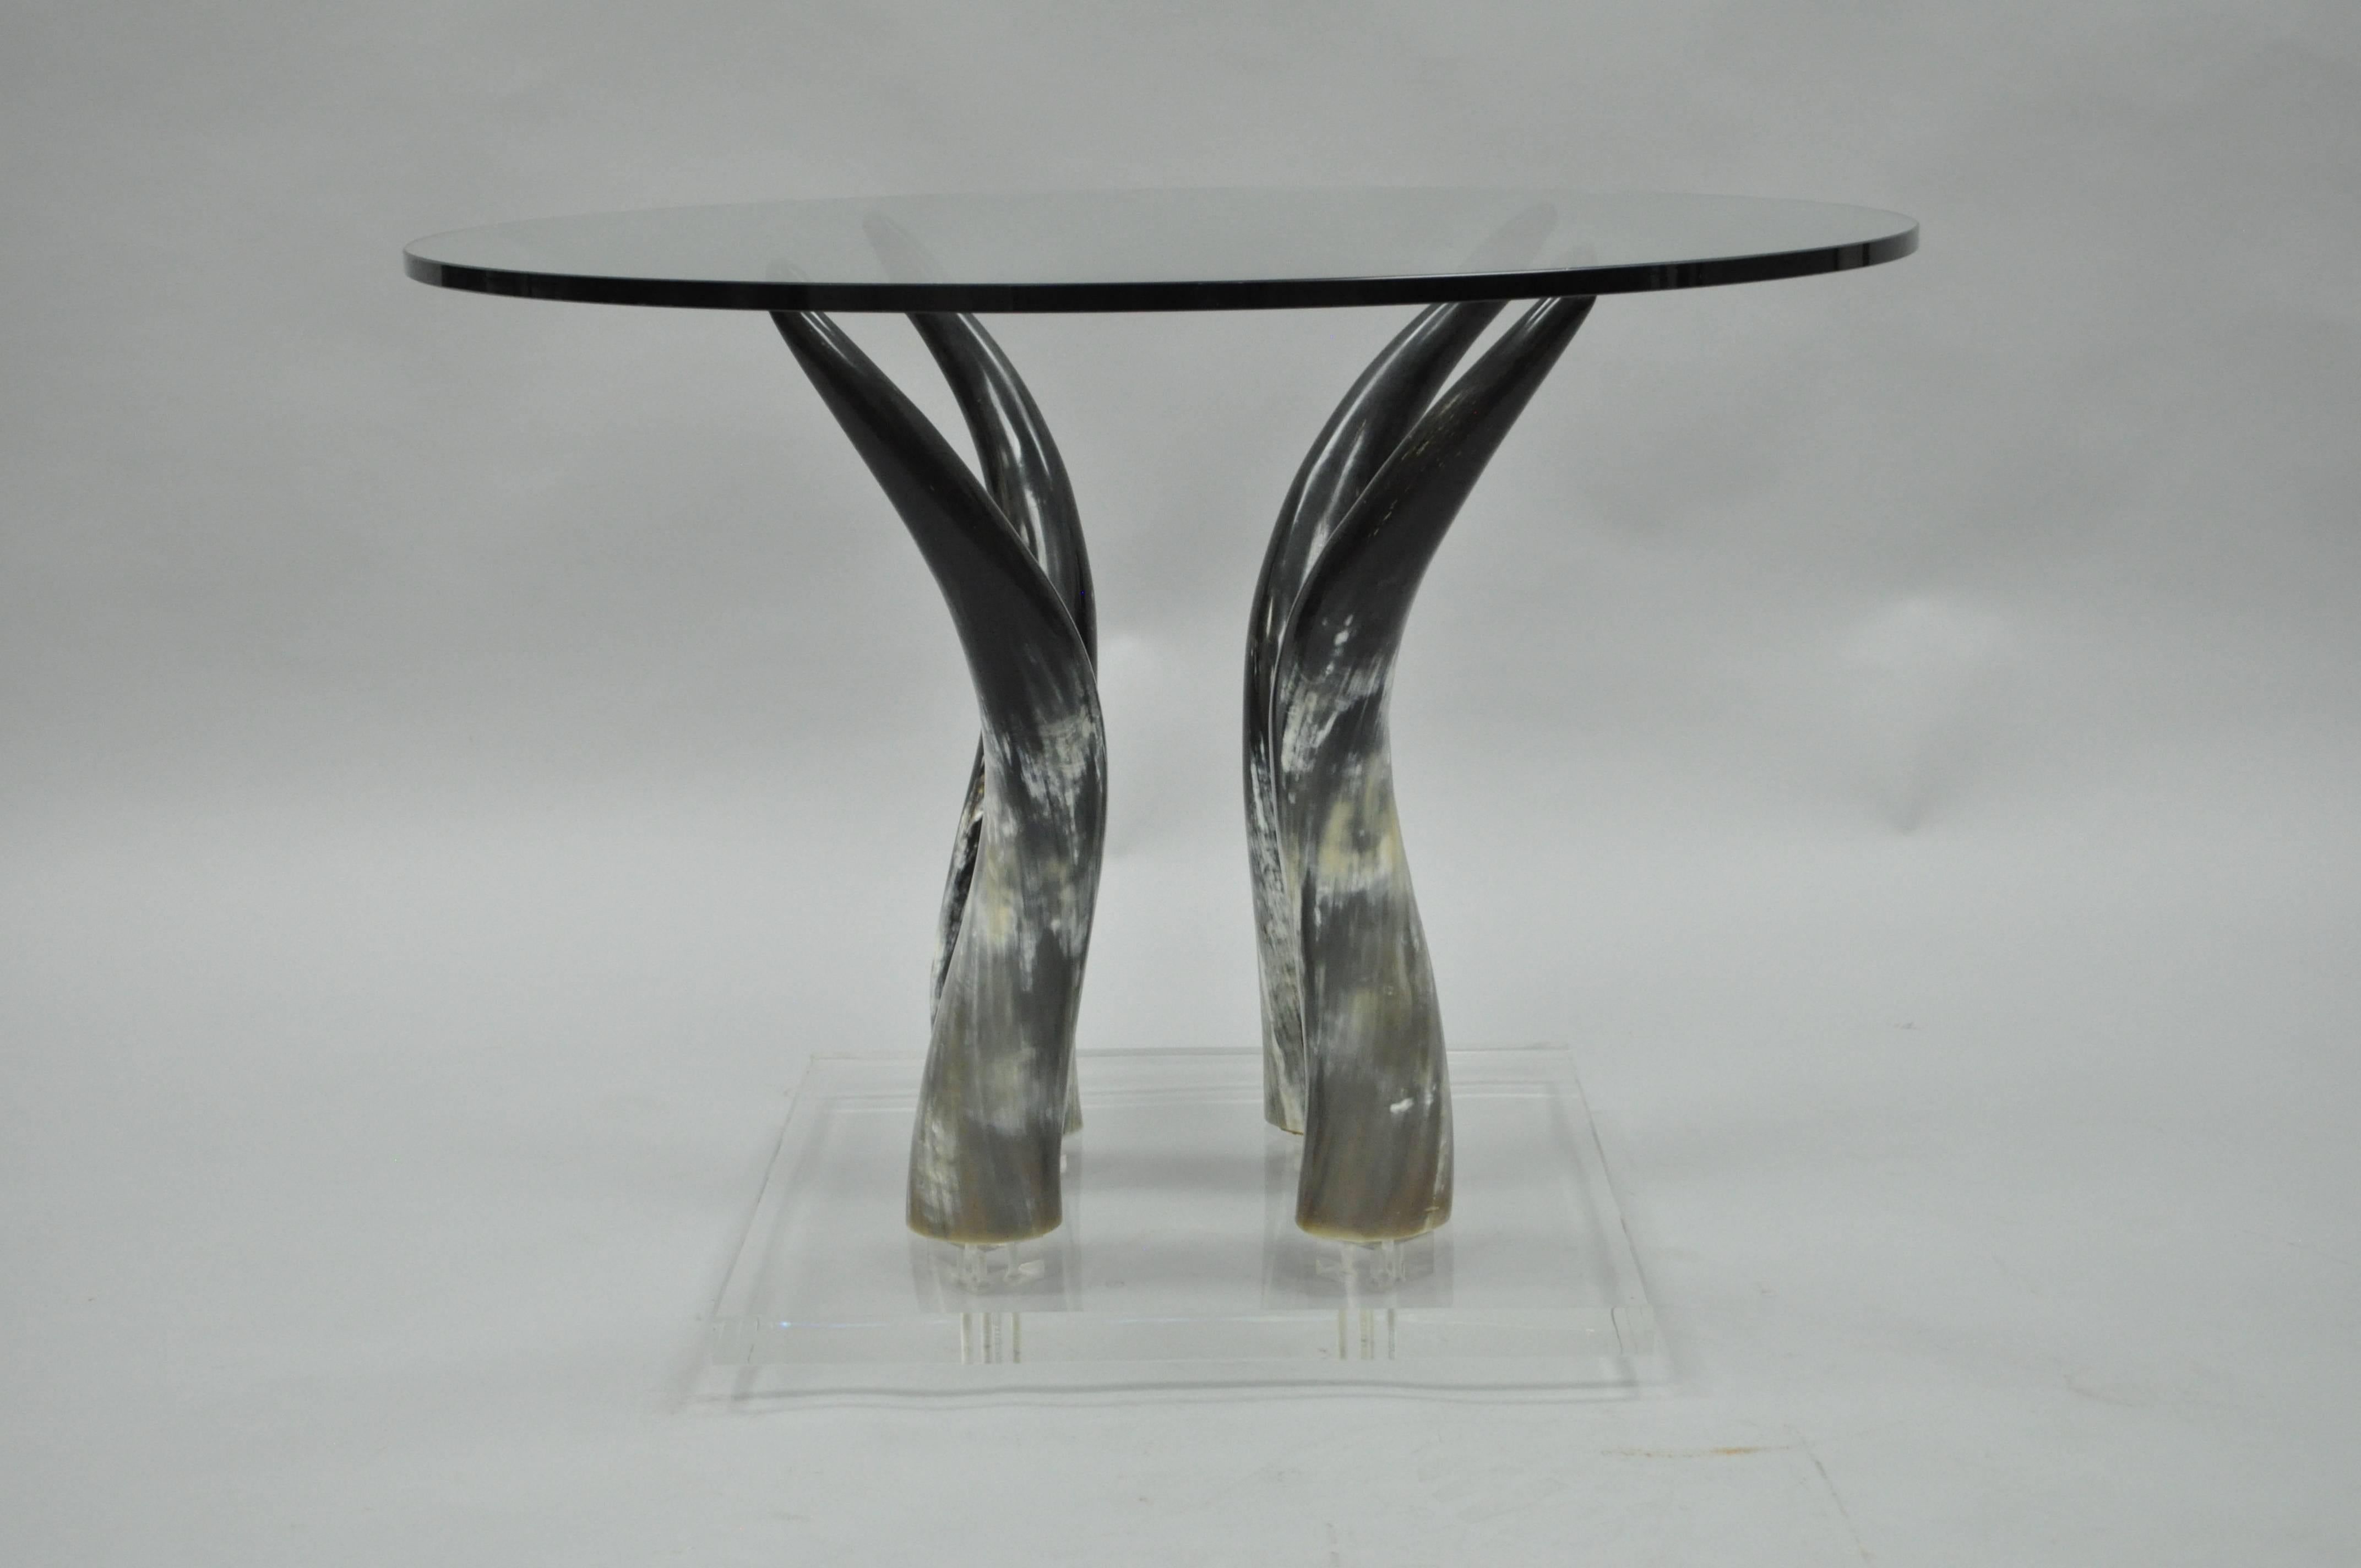 Very unique vintage Mid-Century Modern Lucite, glass and Horn occasional side table. Item features a round glass top, four faux Horn supports raised on a Lucite floating form base.